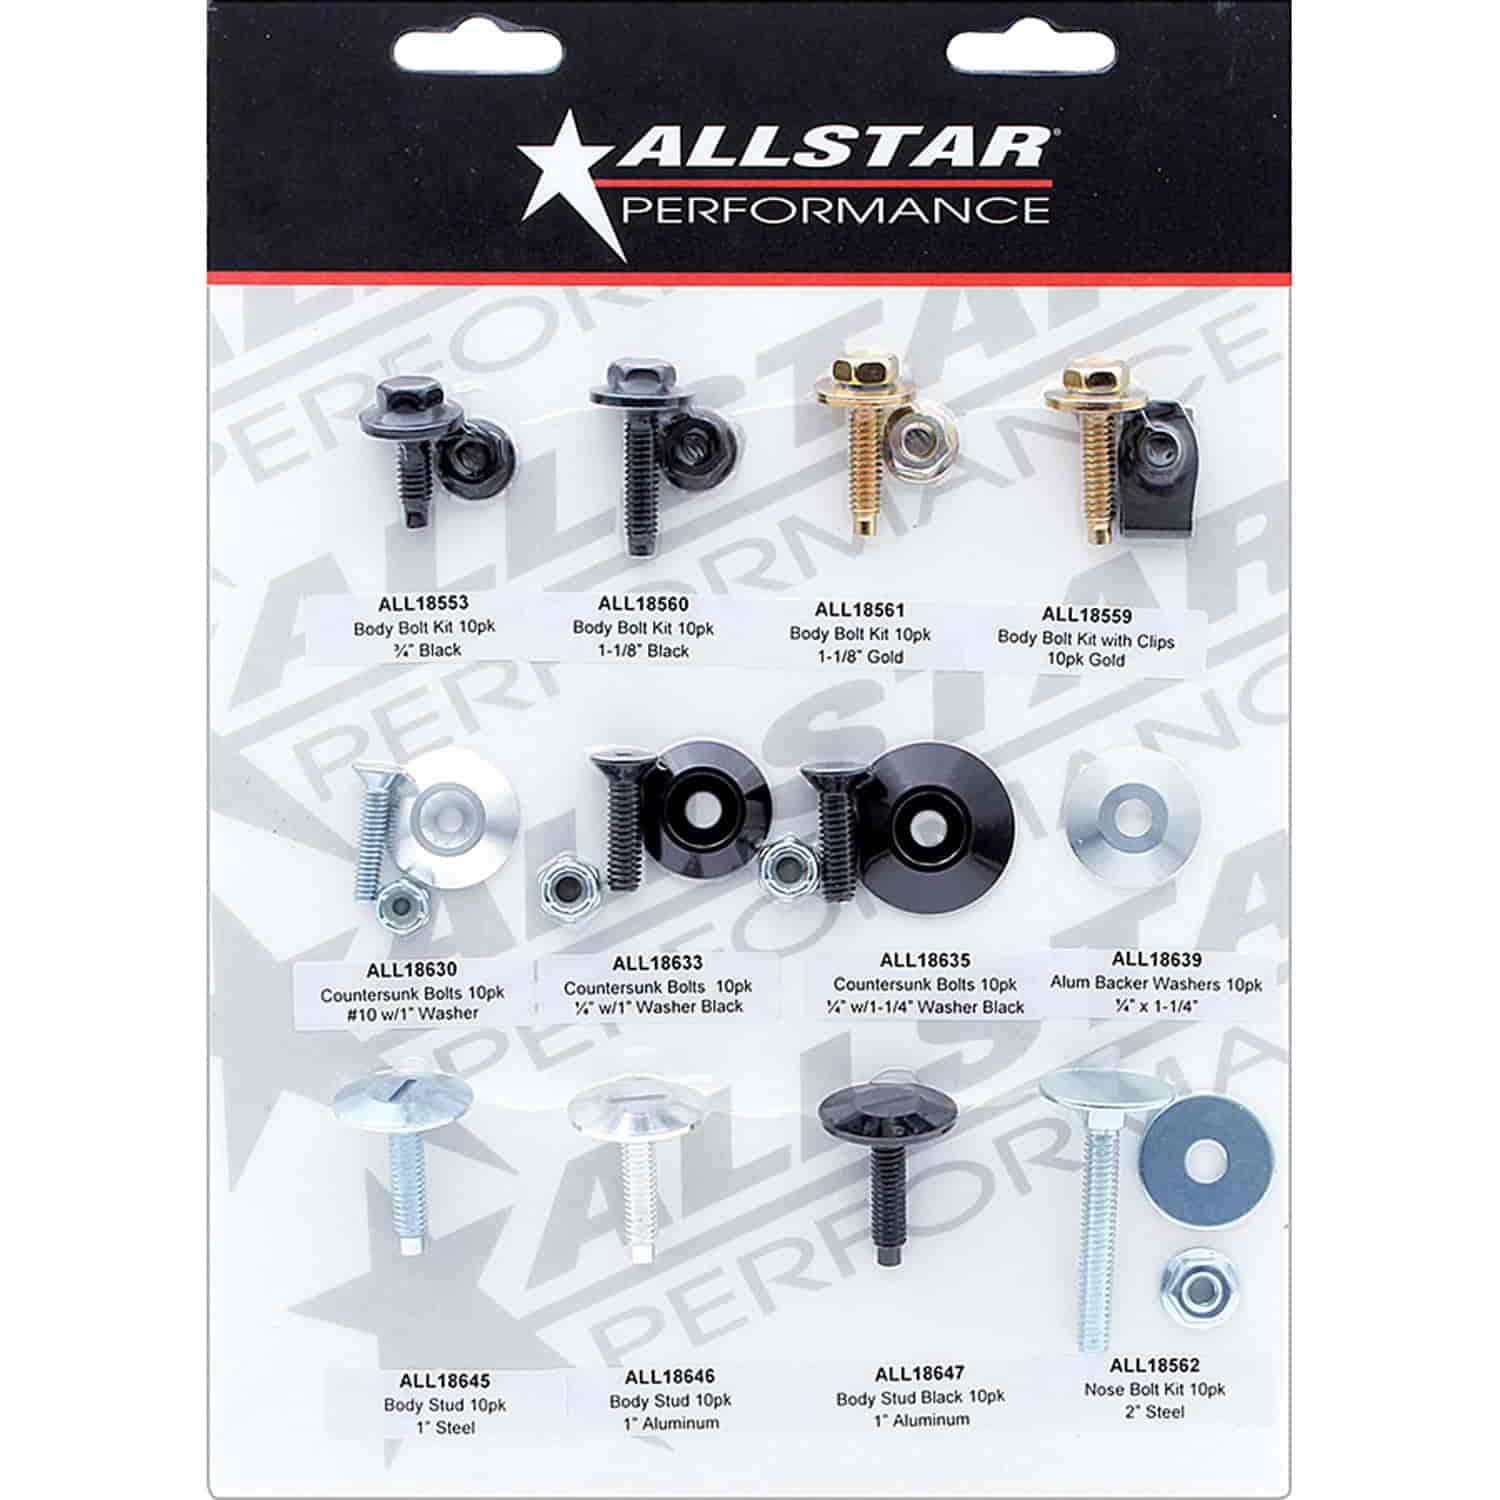 Body Bolt Merchandising Display 8" x 10" Card Including Assortment of Body Bolts